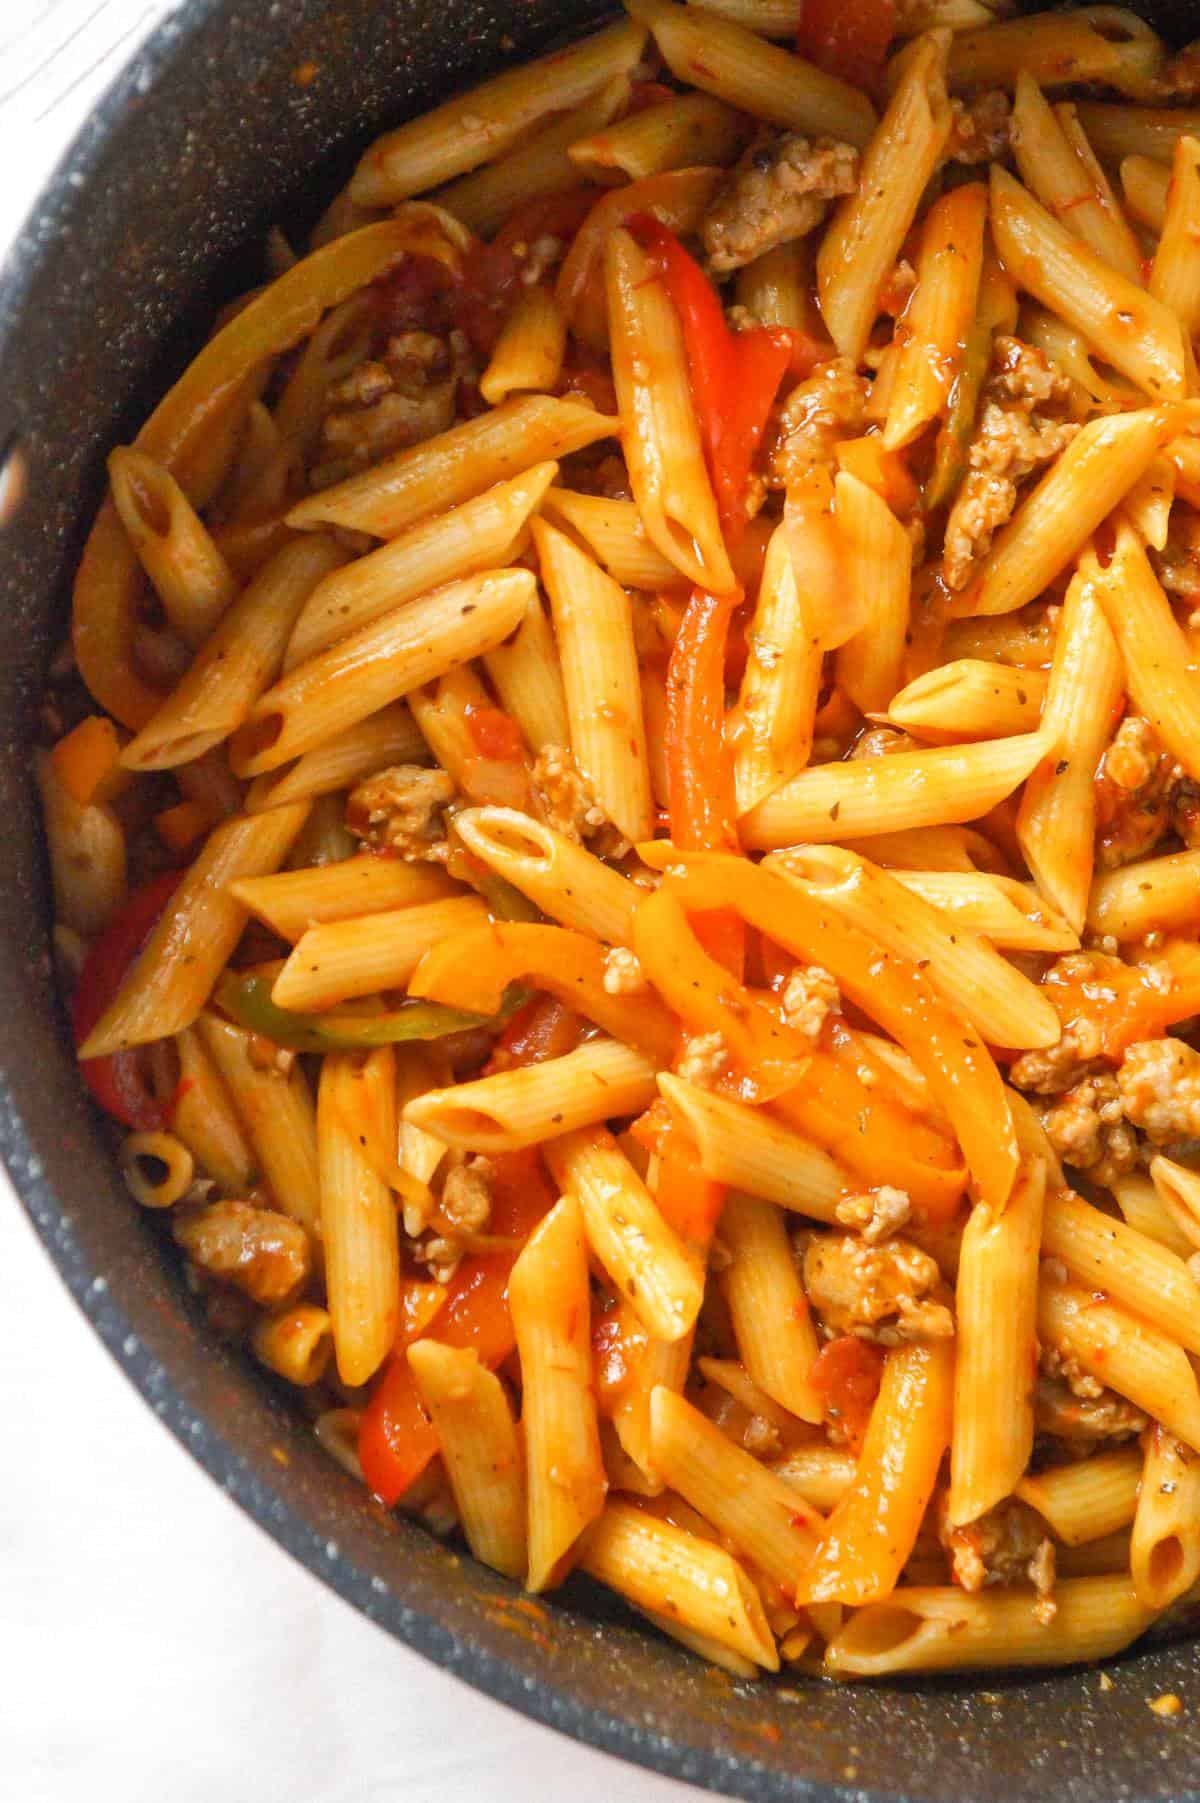 Sausage and Peppers Pasta is a delicious dinner recipe using penne pasta and loaded with sliced bell peppers, onions and Italian sausage meat.